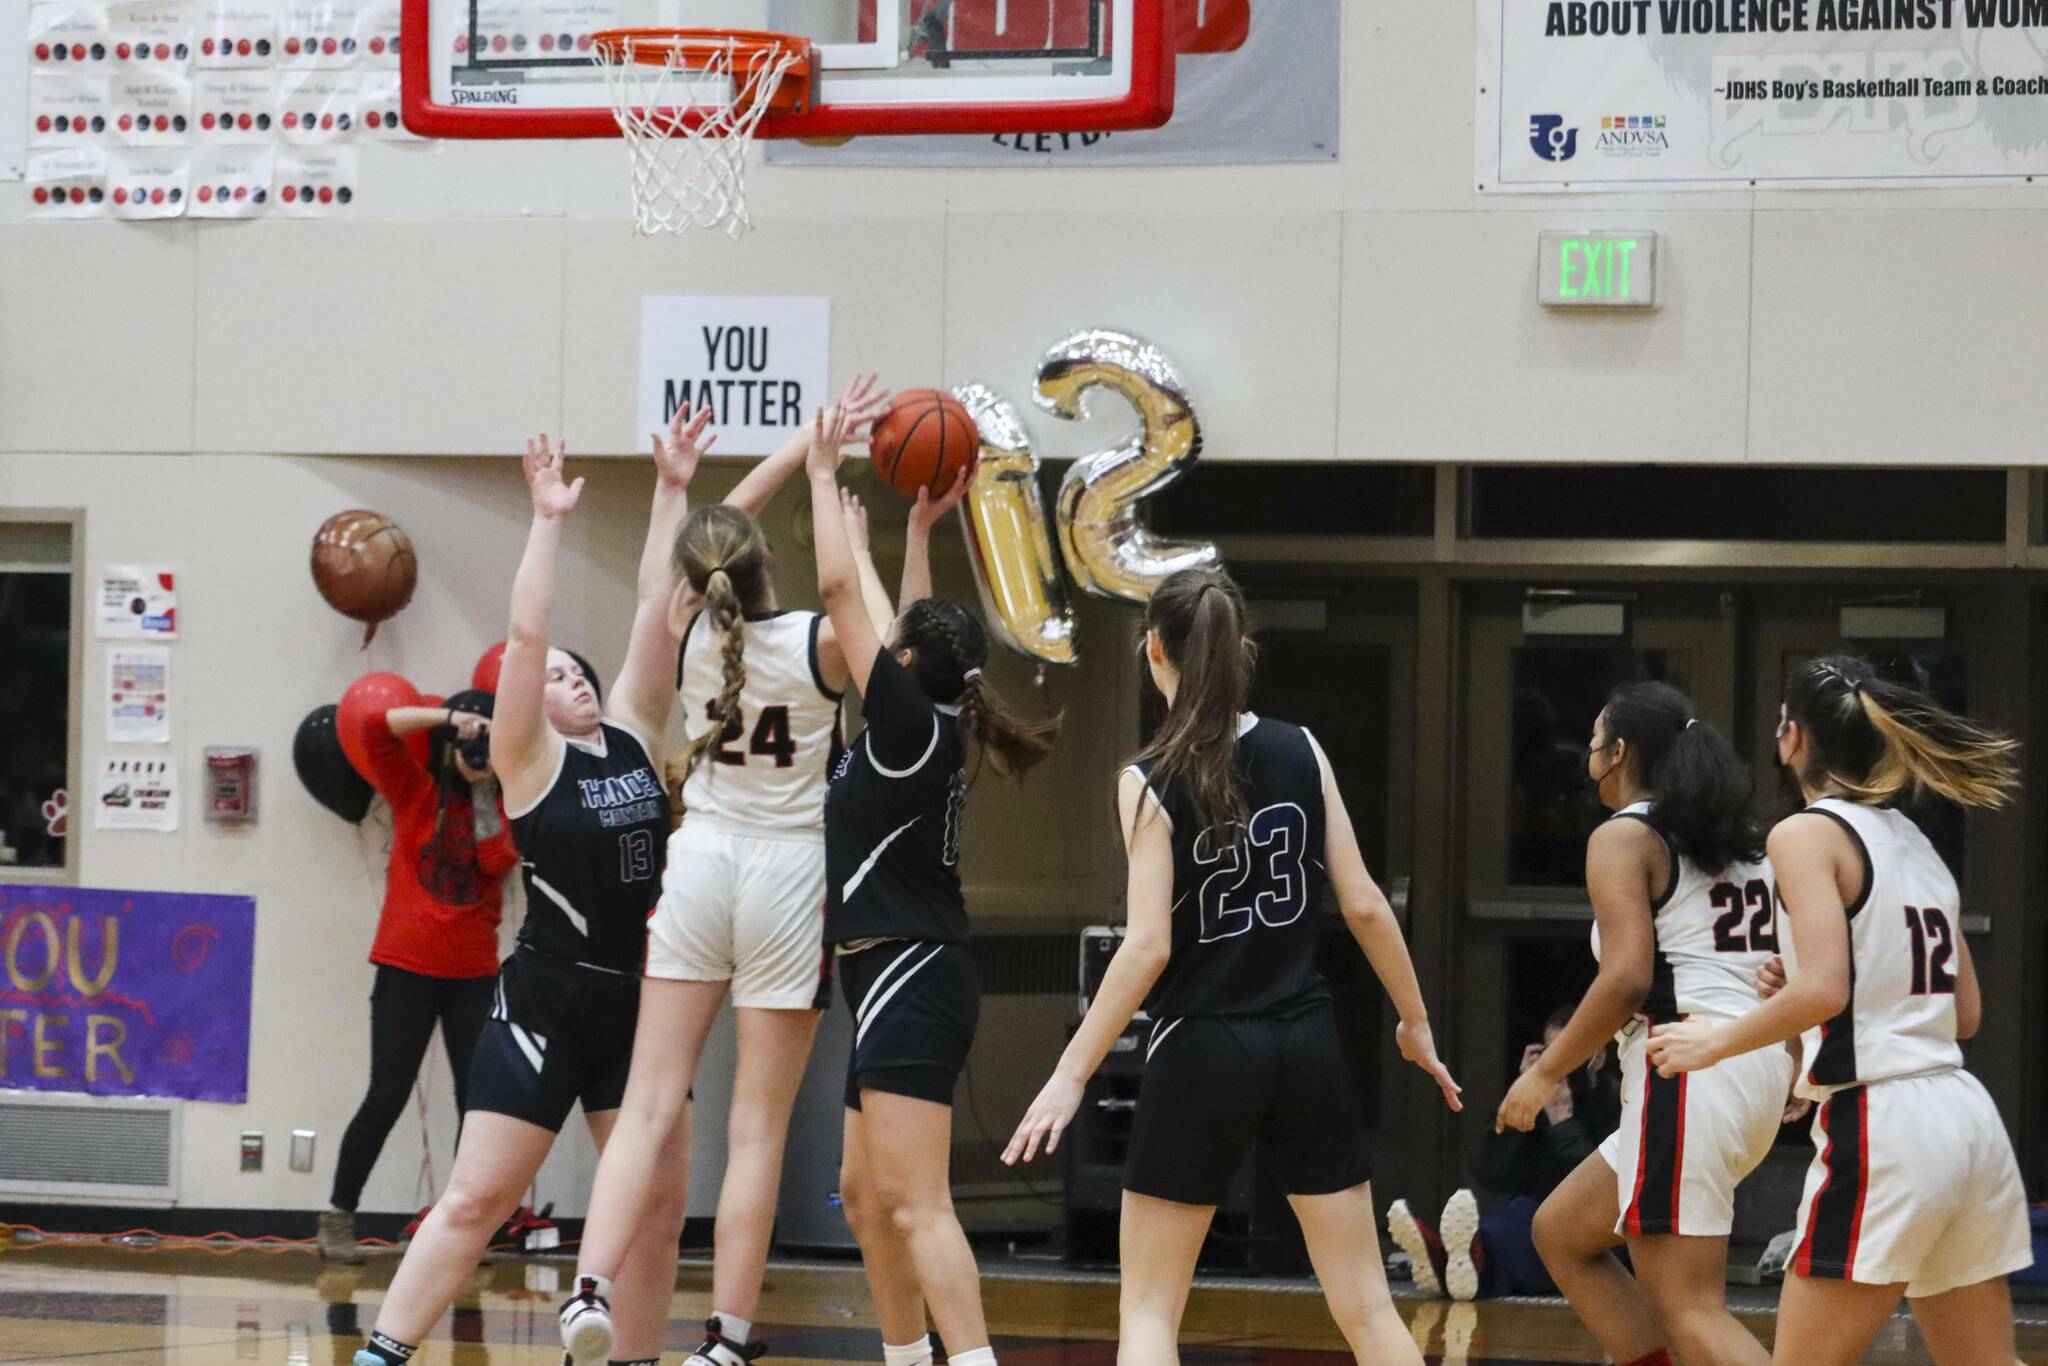 JDHS’ Mila Hargrave (24) sinks a shot during a game against TMHS on March 5, 2022. JDHS would go on to win the match. (Michael S. Lockett / Juneau Empire)